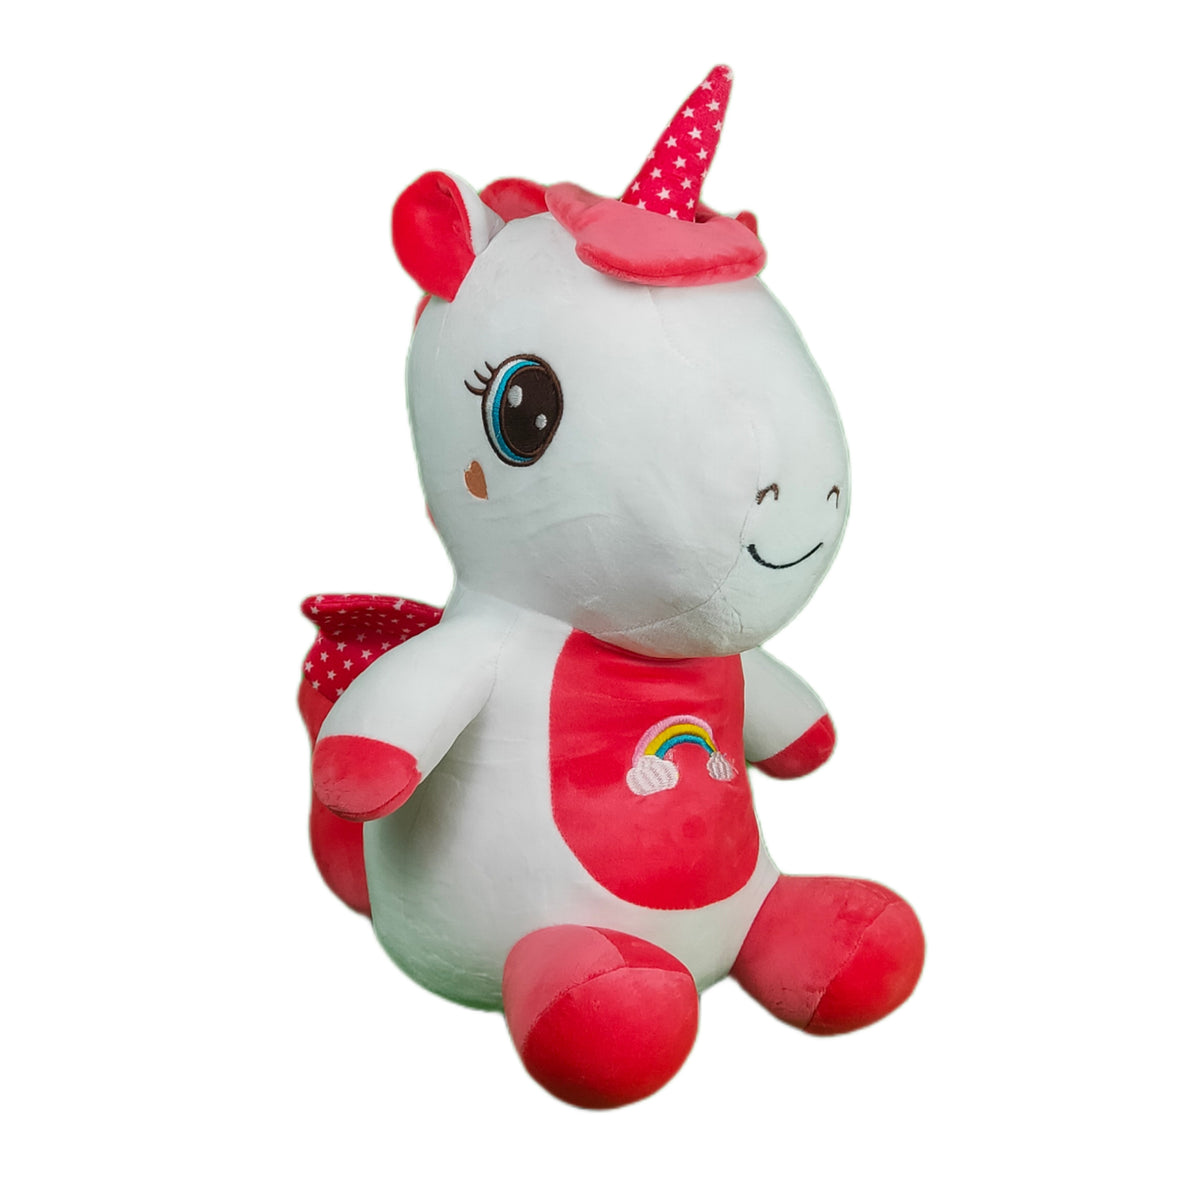 Play Hour Garcie The Unicorn Plush Soft Toy For Ages 3 Years And Up - Red, 45cm